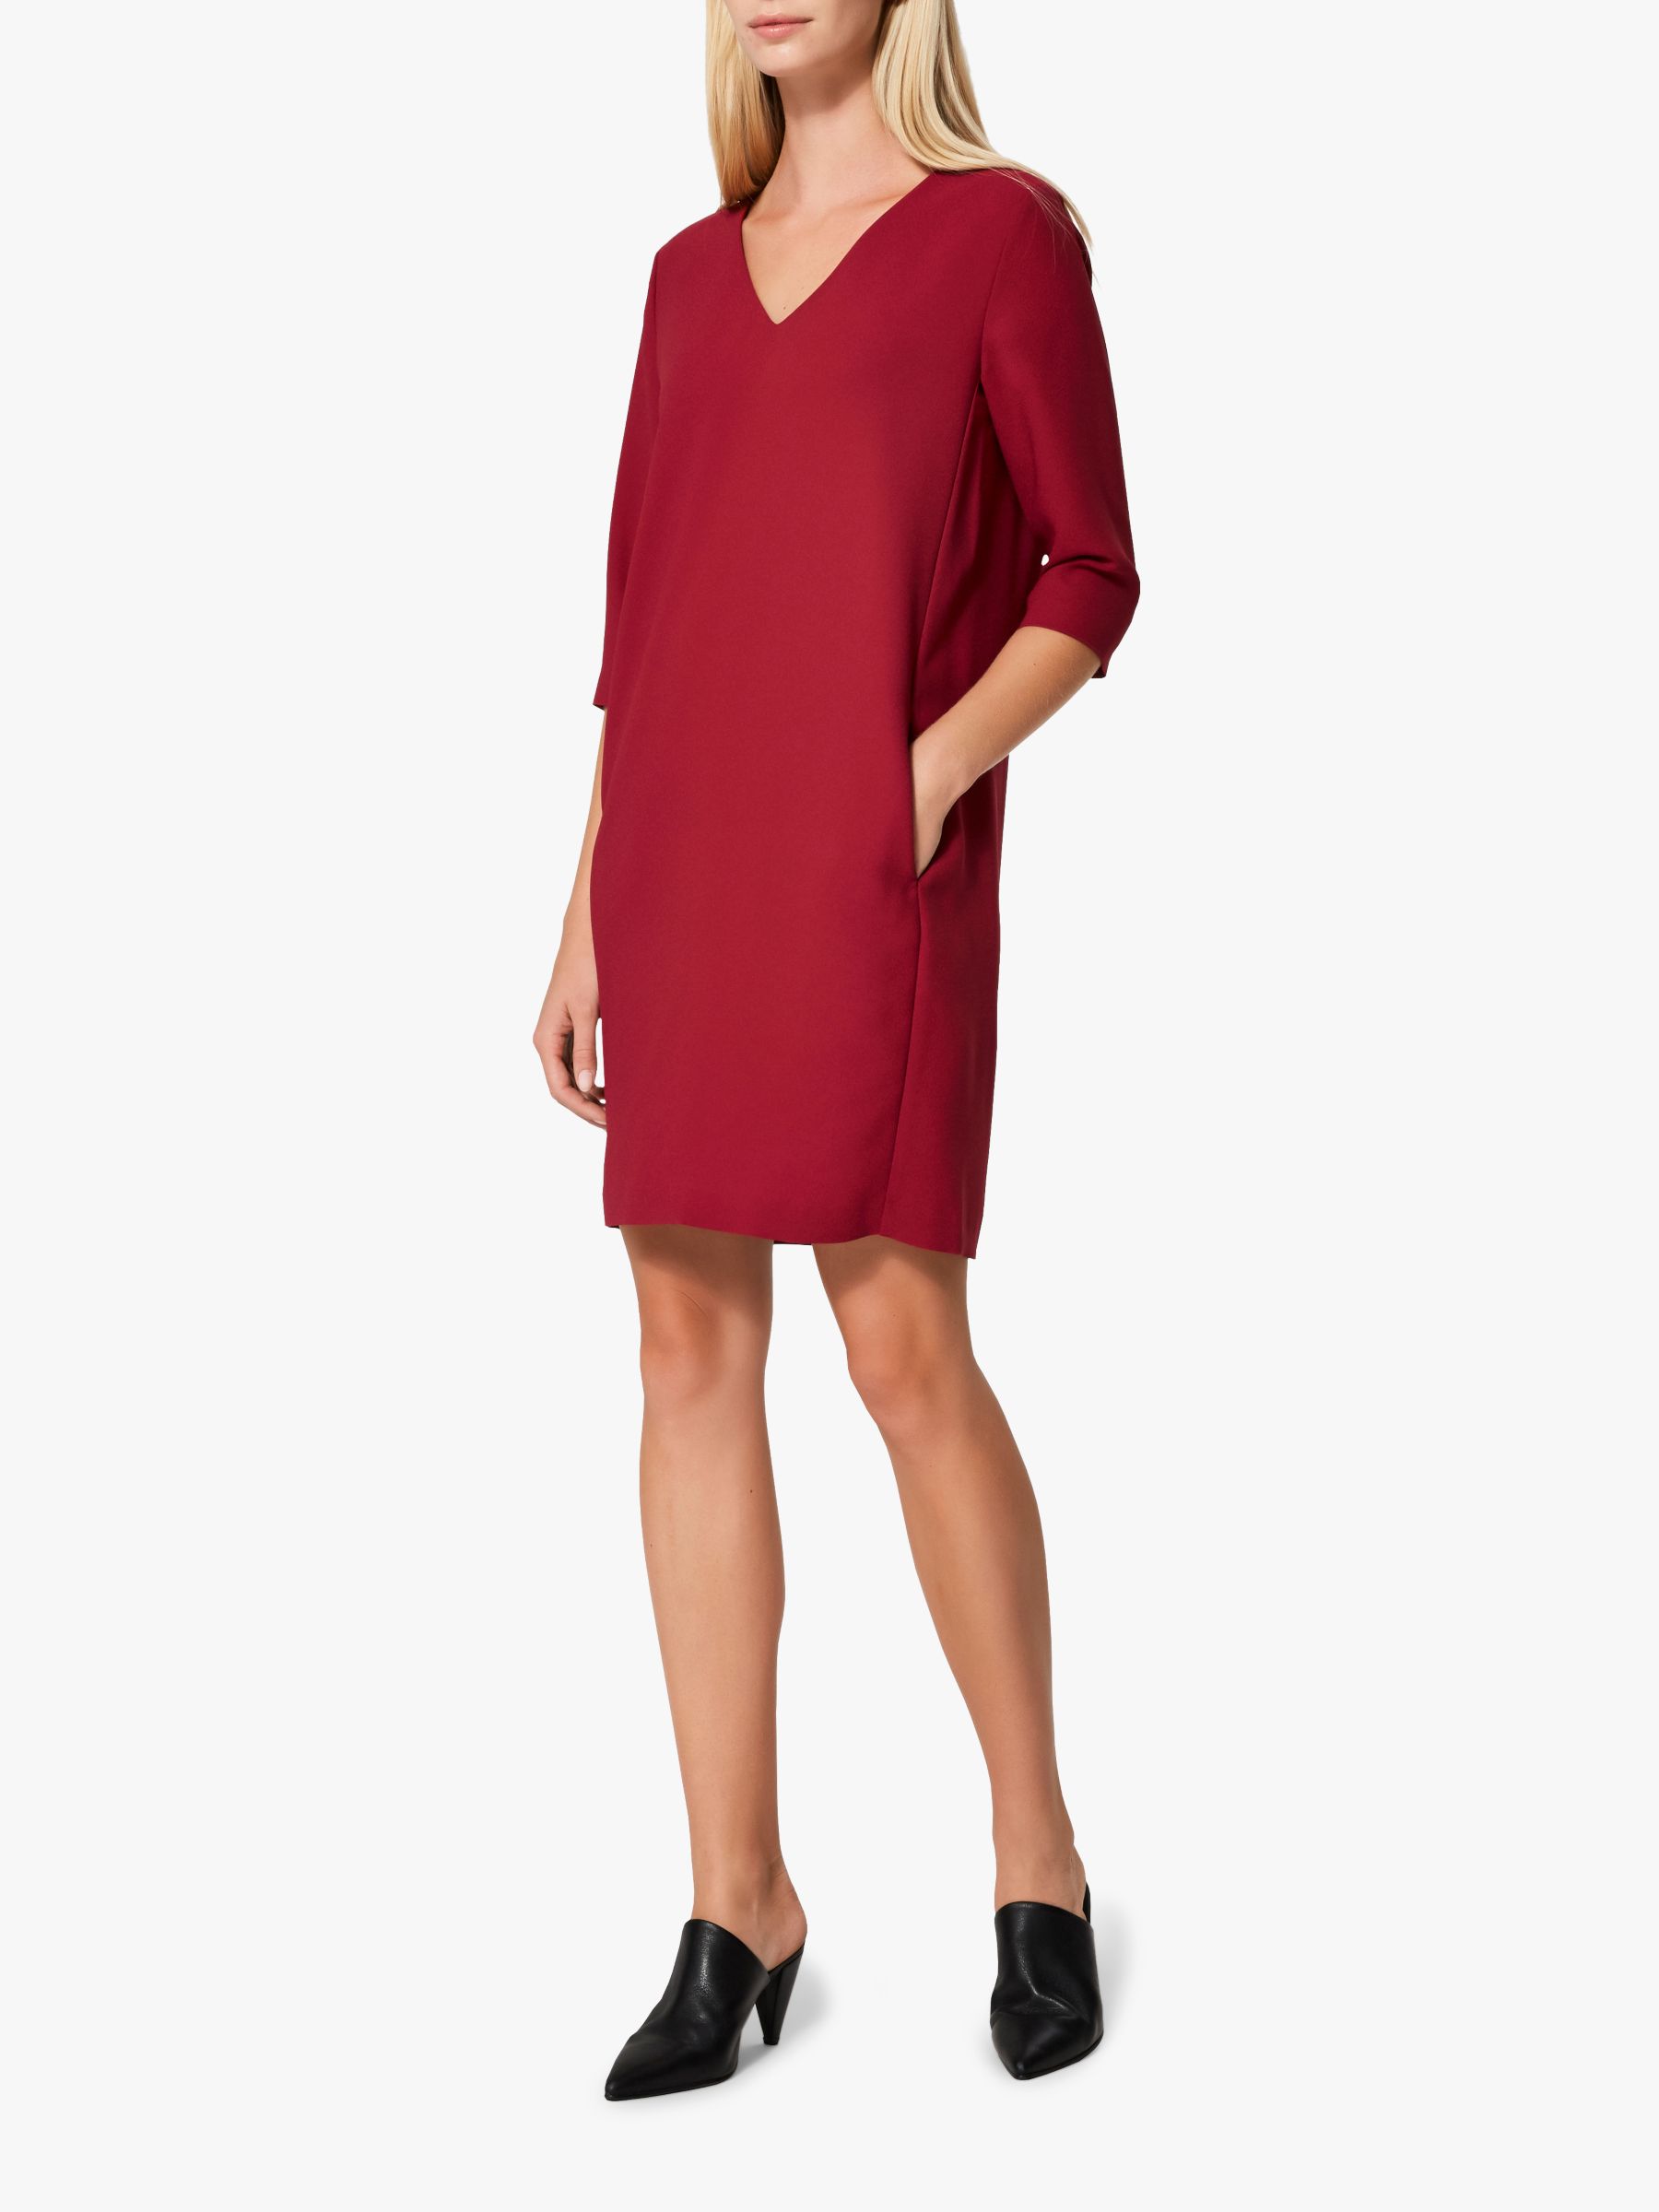 Selected Femme Tunni Dress, Beet Red